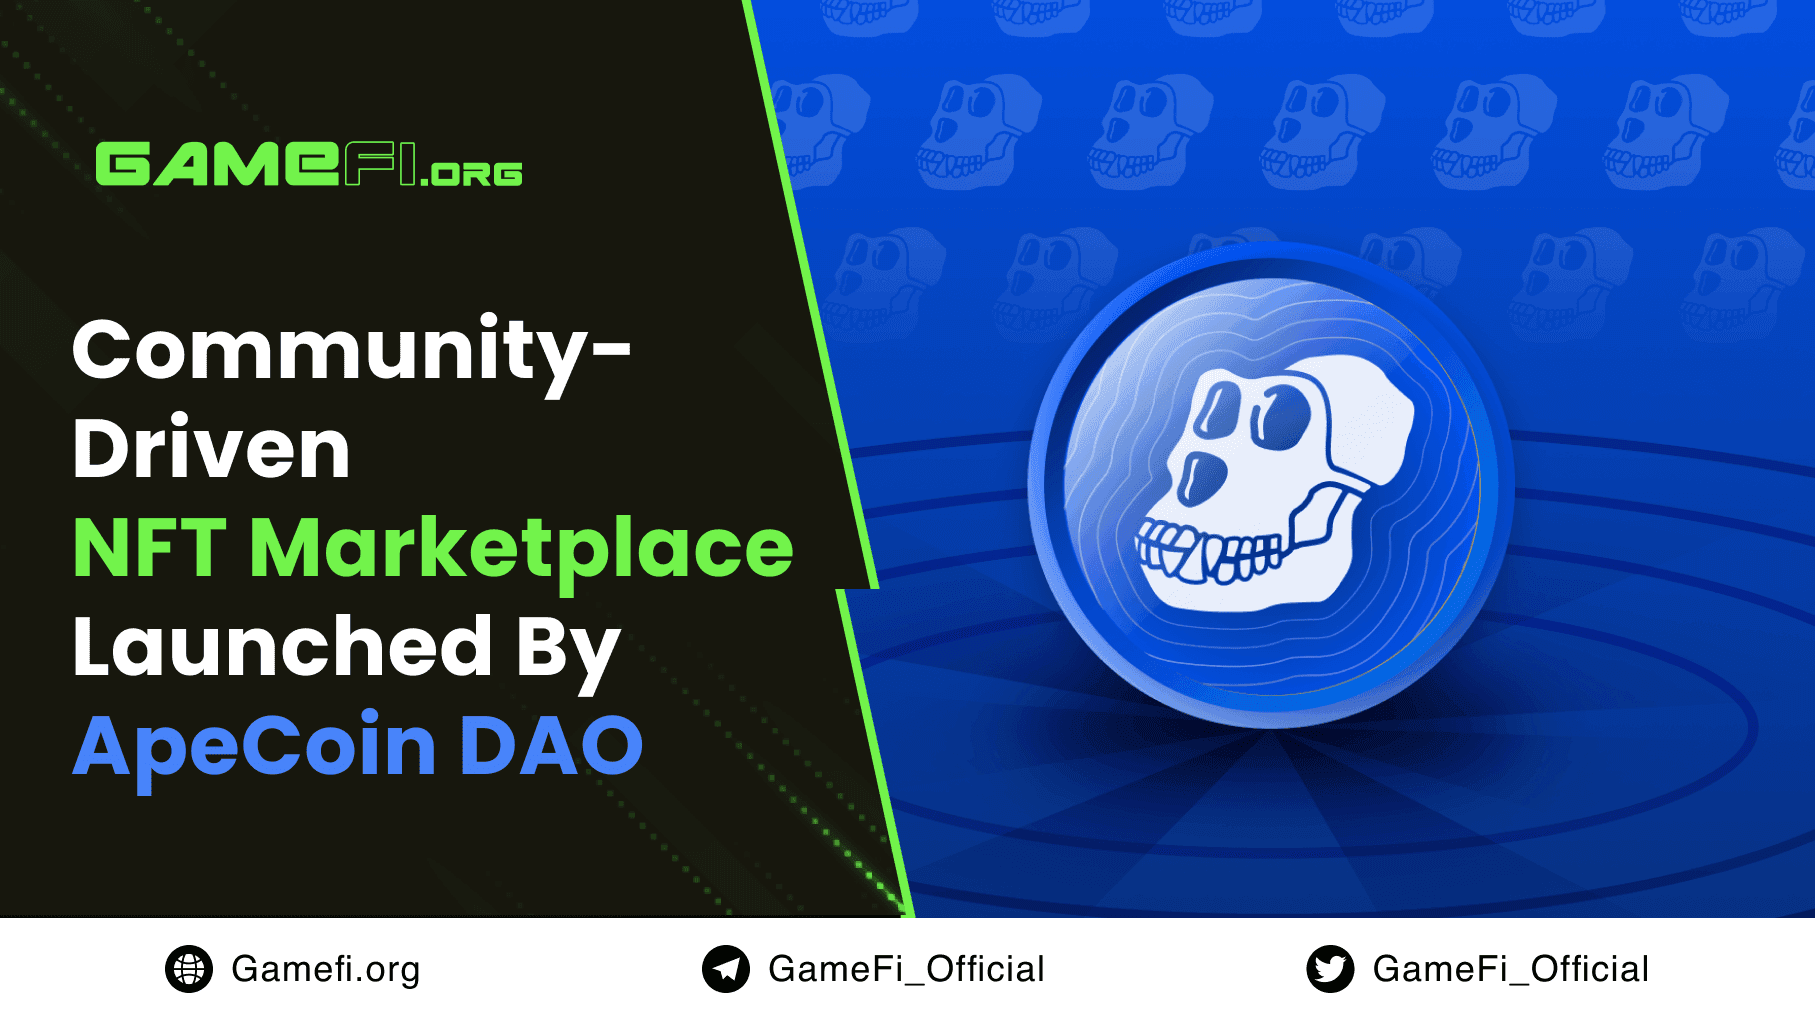 Community-Driven NFT Marketplace Launched by ApeCoin DAO